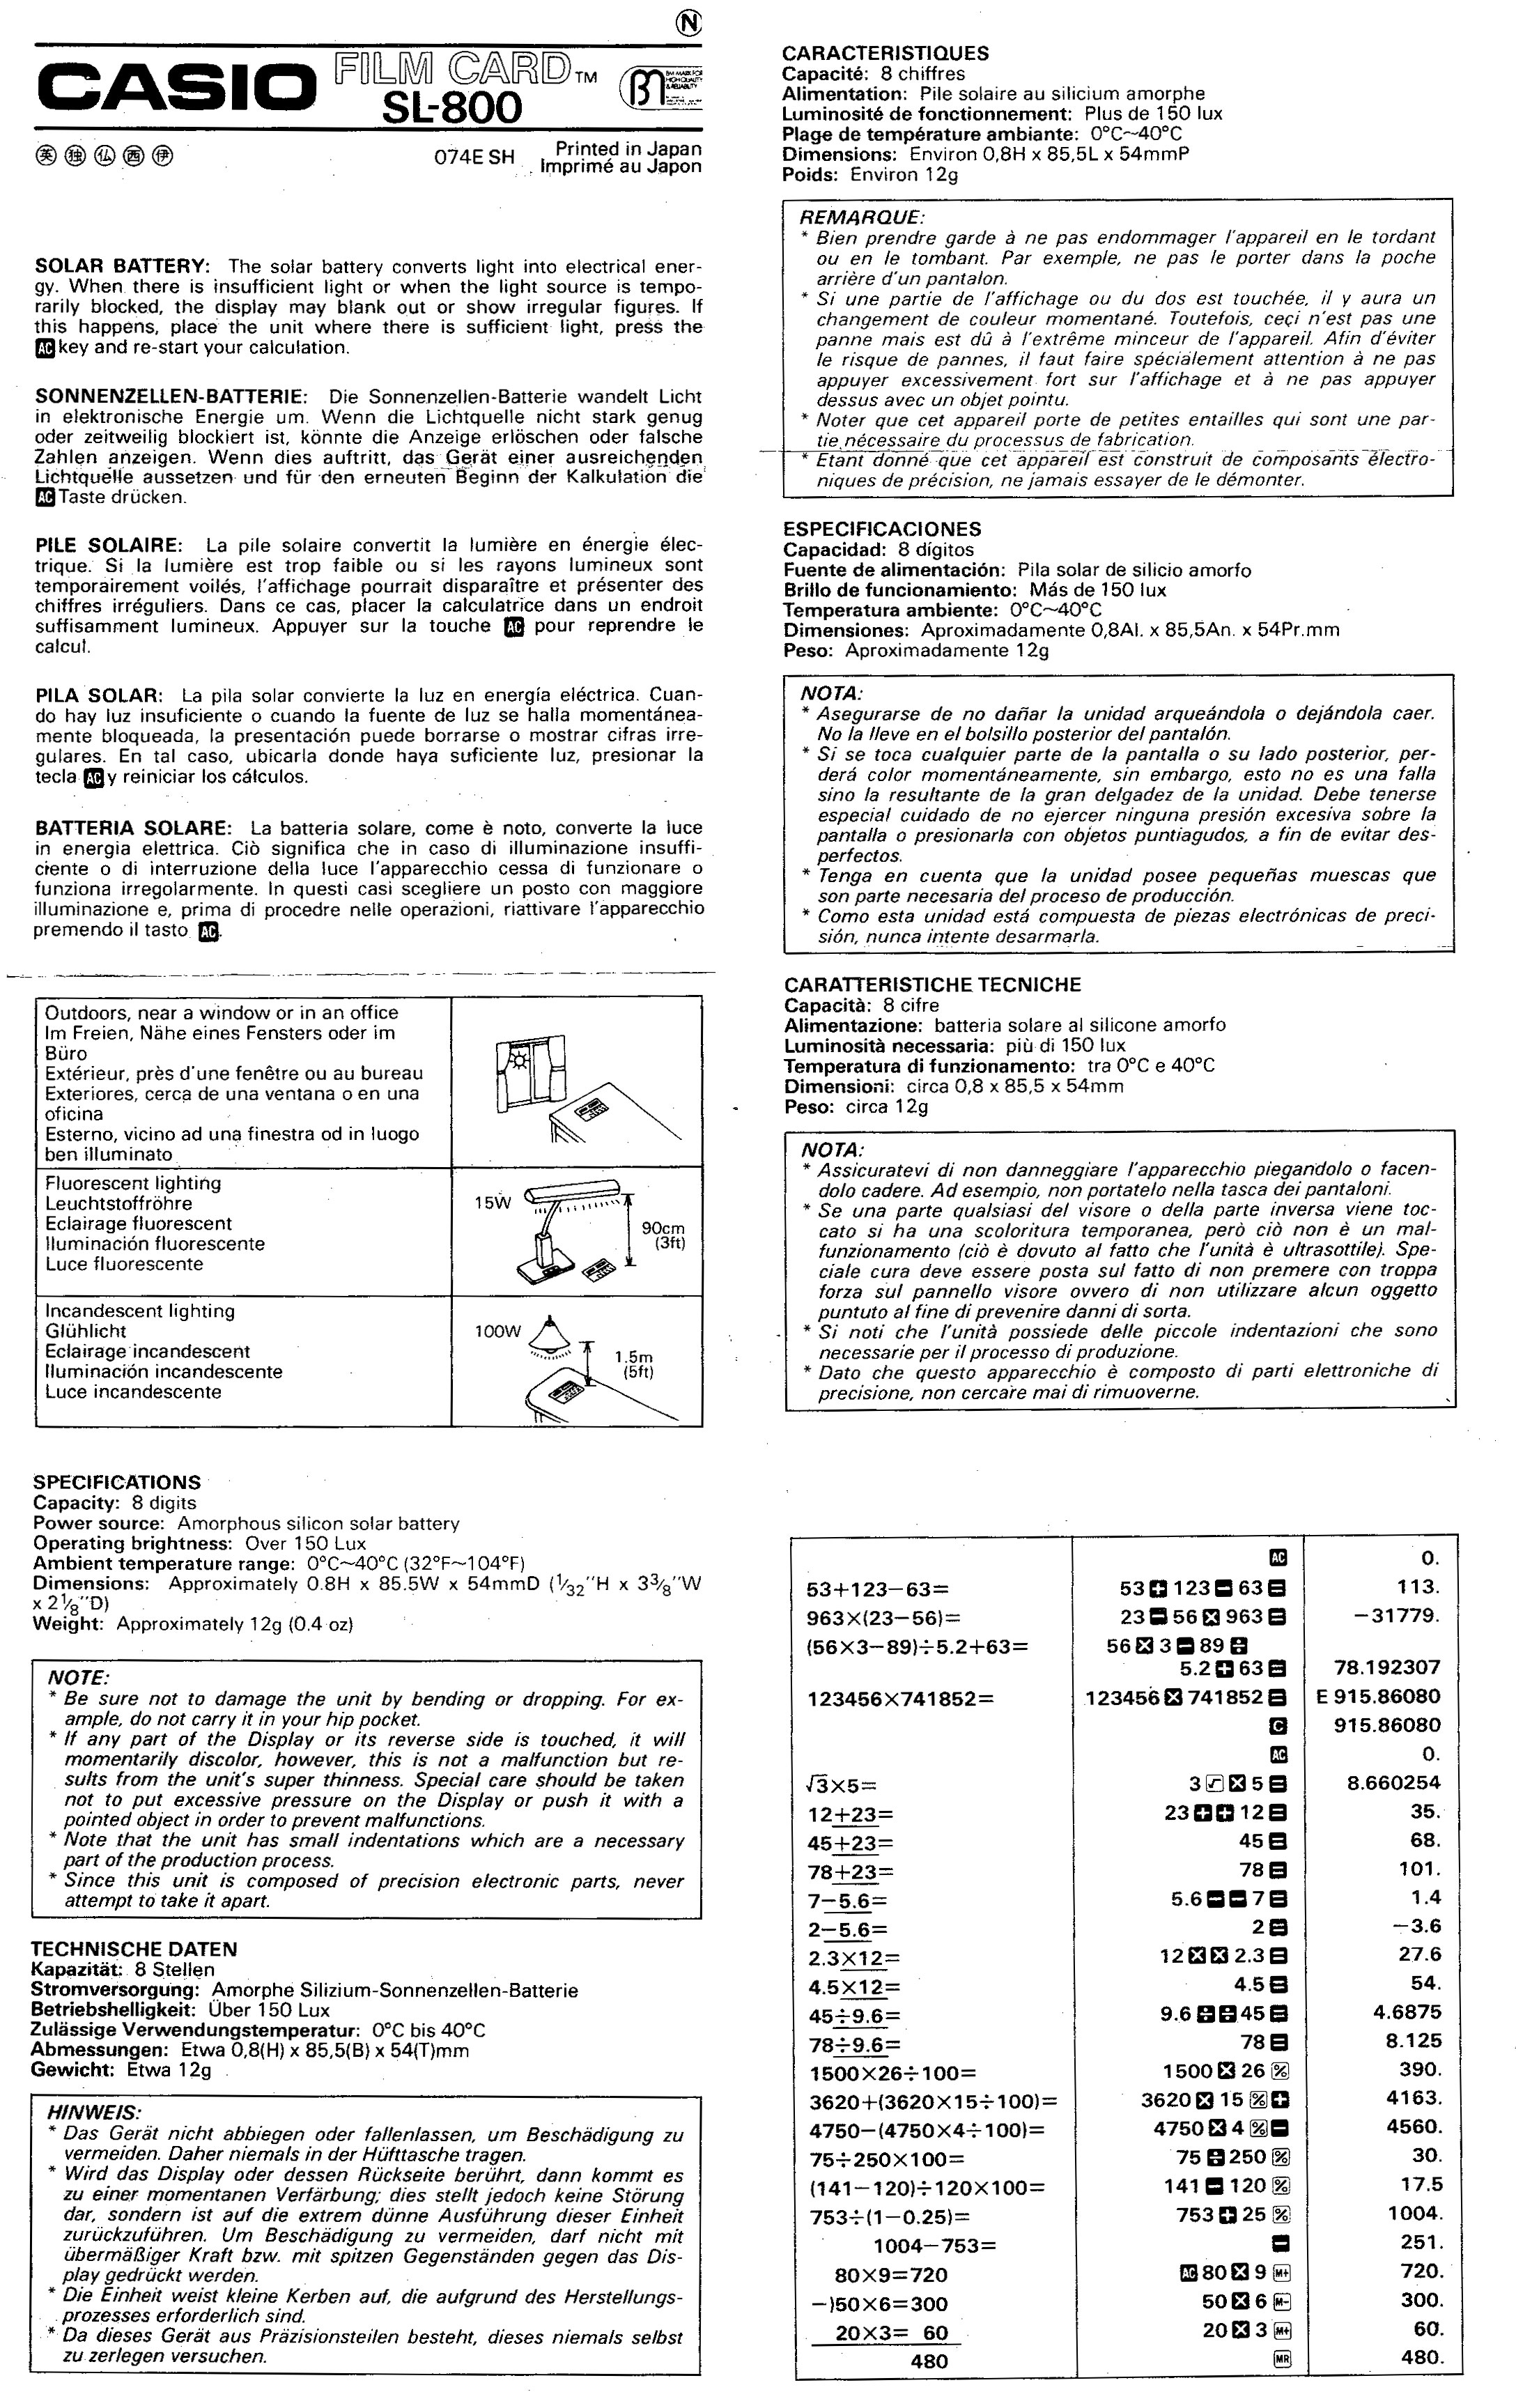 casio instruction manual download